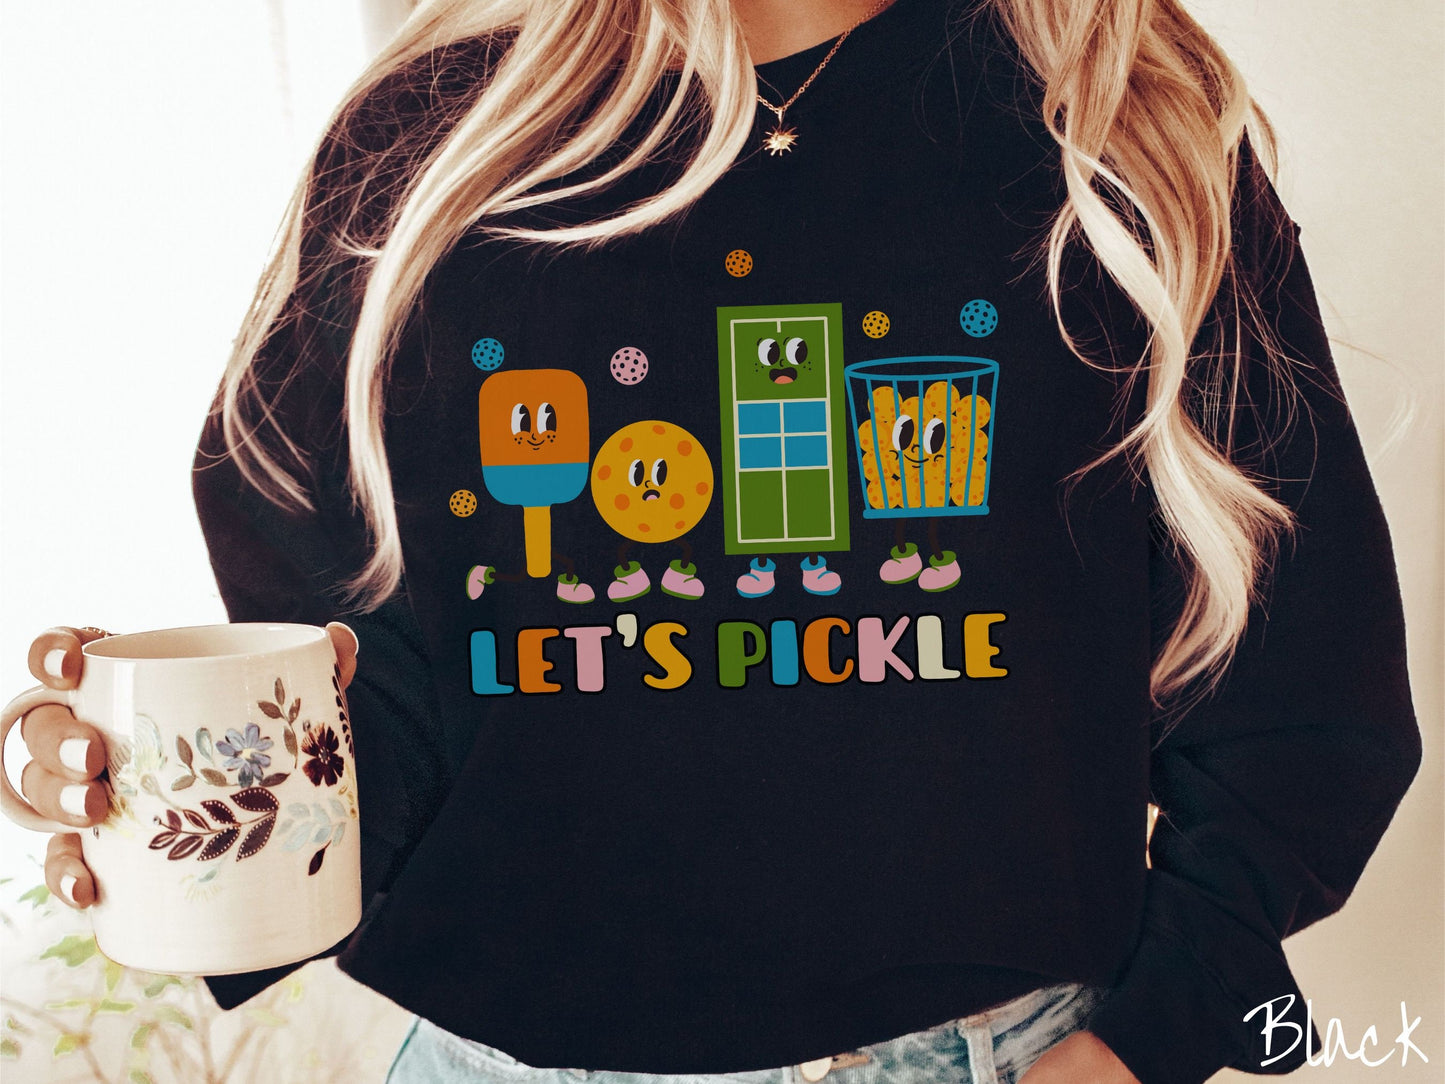 A woman wearing a cute black colored sweatshirt with the text Lets Pickle, and above the text are a popsicle, cookie, popcorn, and pickle balls.